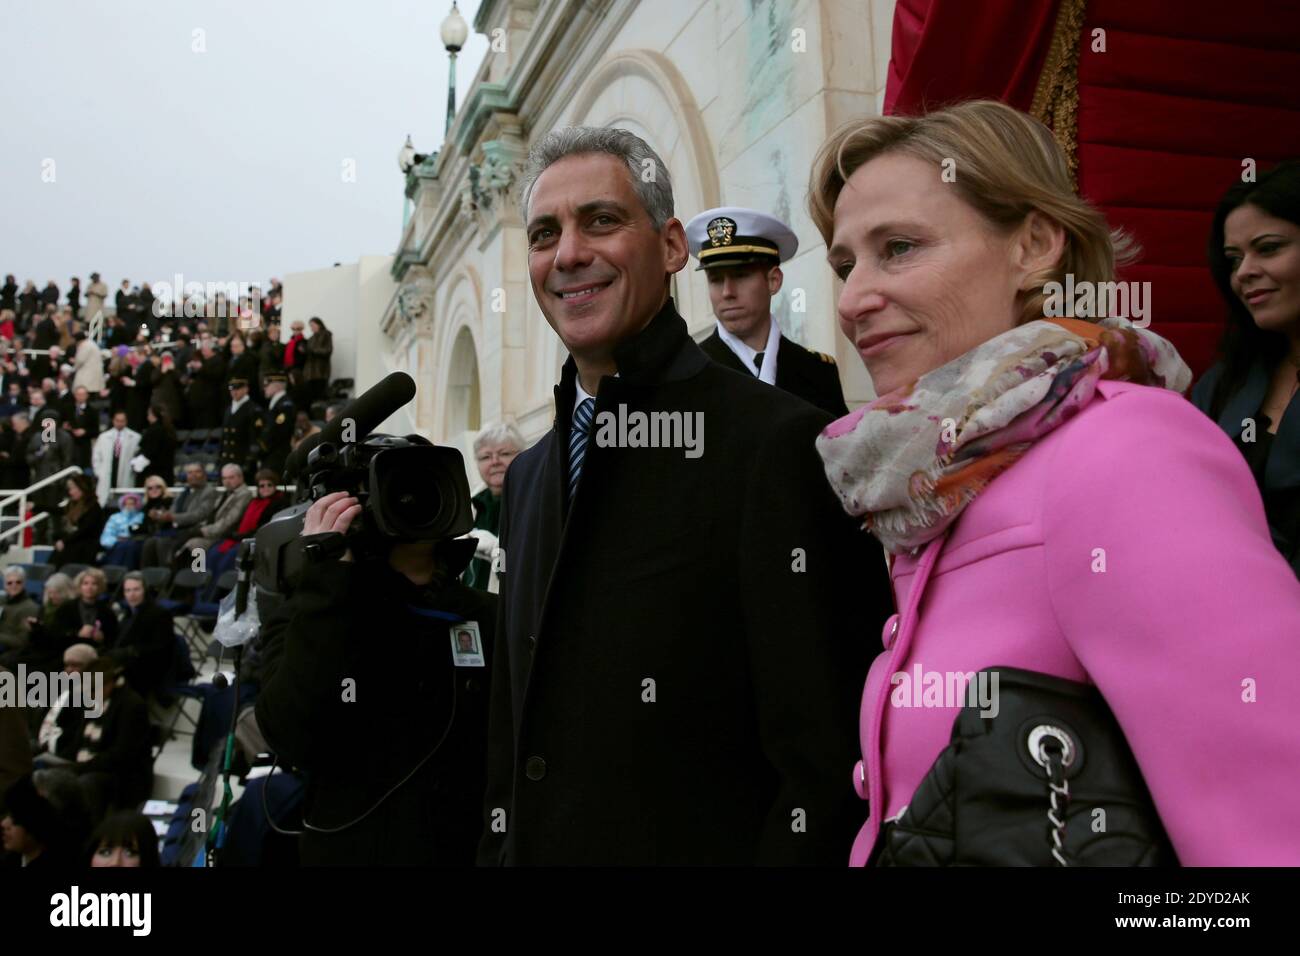 Chicago Mayor Rahm Emanuel and wife Amy Rule arrive before the presidential inauguration on the West Front of the U.S. Capitol in Washington, DC, USA, on January 21, 2013. Barack Obama was re-elected for a second term as President of the United States. Photo by Win McNamee/Pool/ABACAUSA.COM Stock Photo